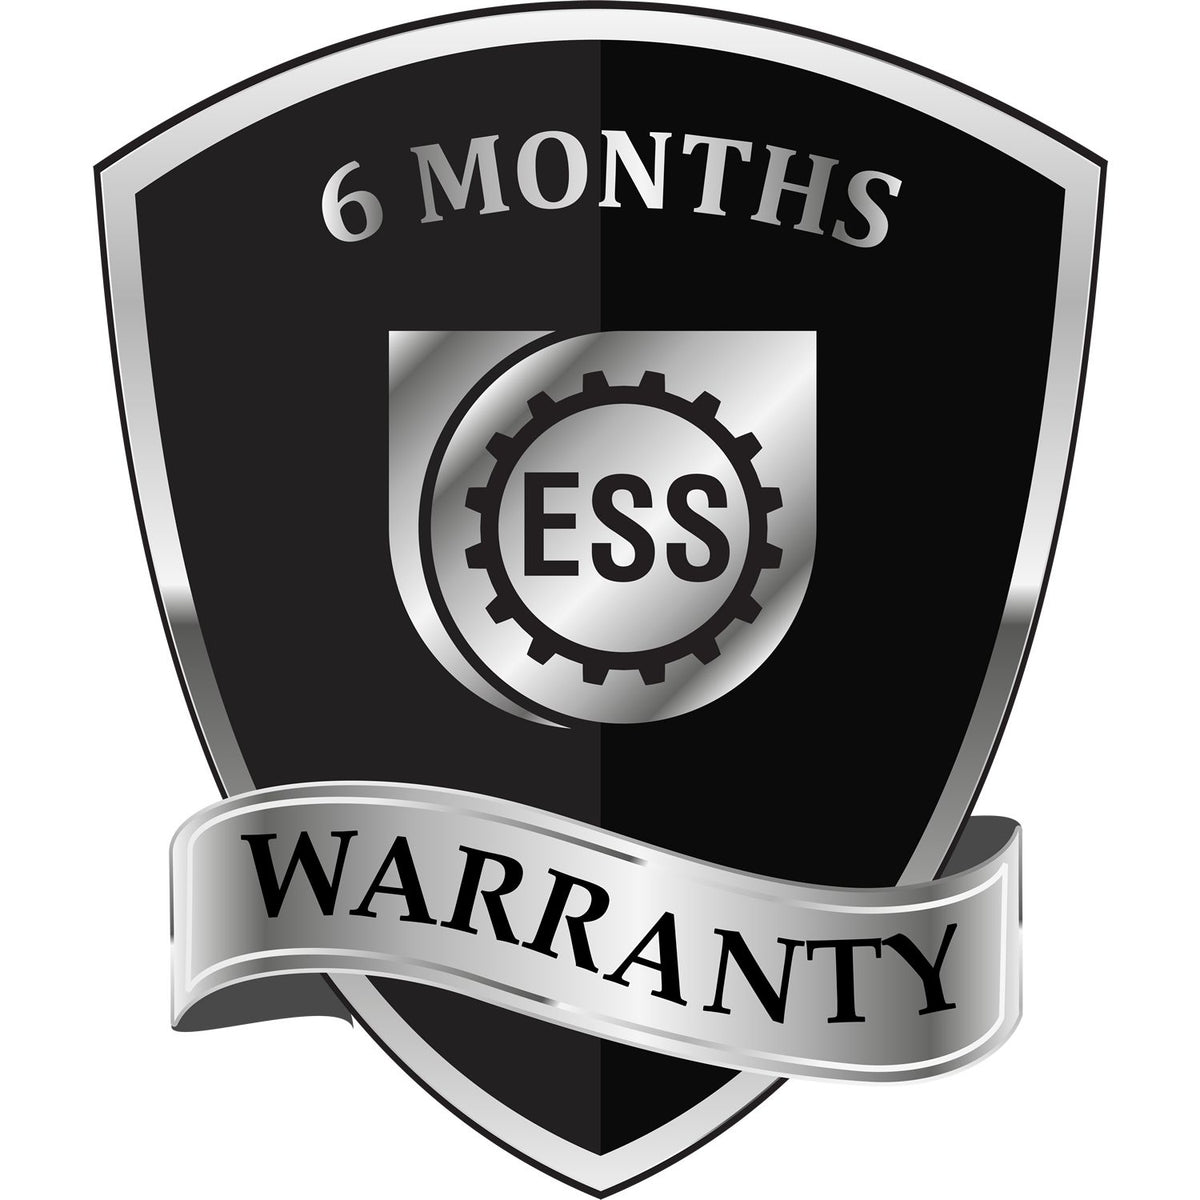 A black and silver badge or emblem showing warranty information for the Self-Inking Massachusetts Geologist Stamp